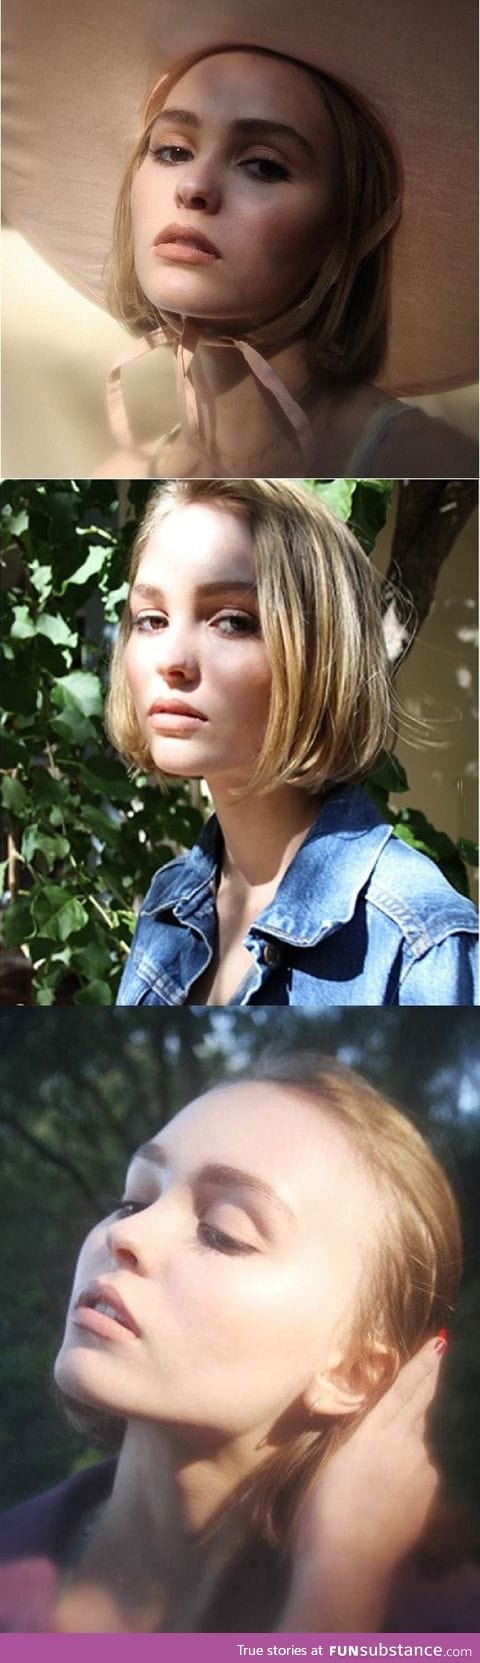 This is Johnny Depp's daughter